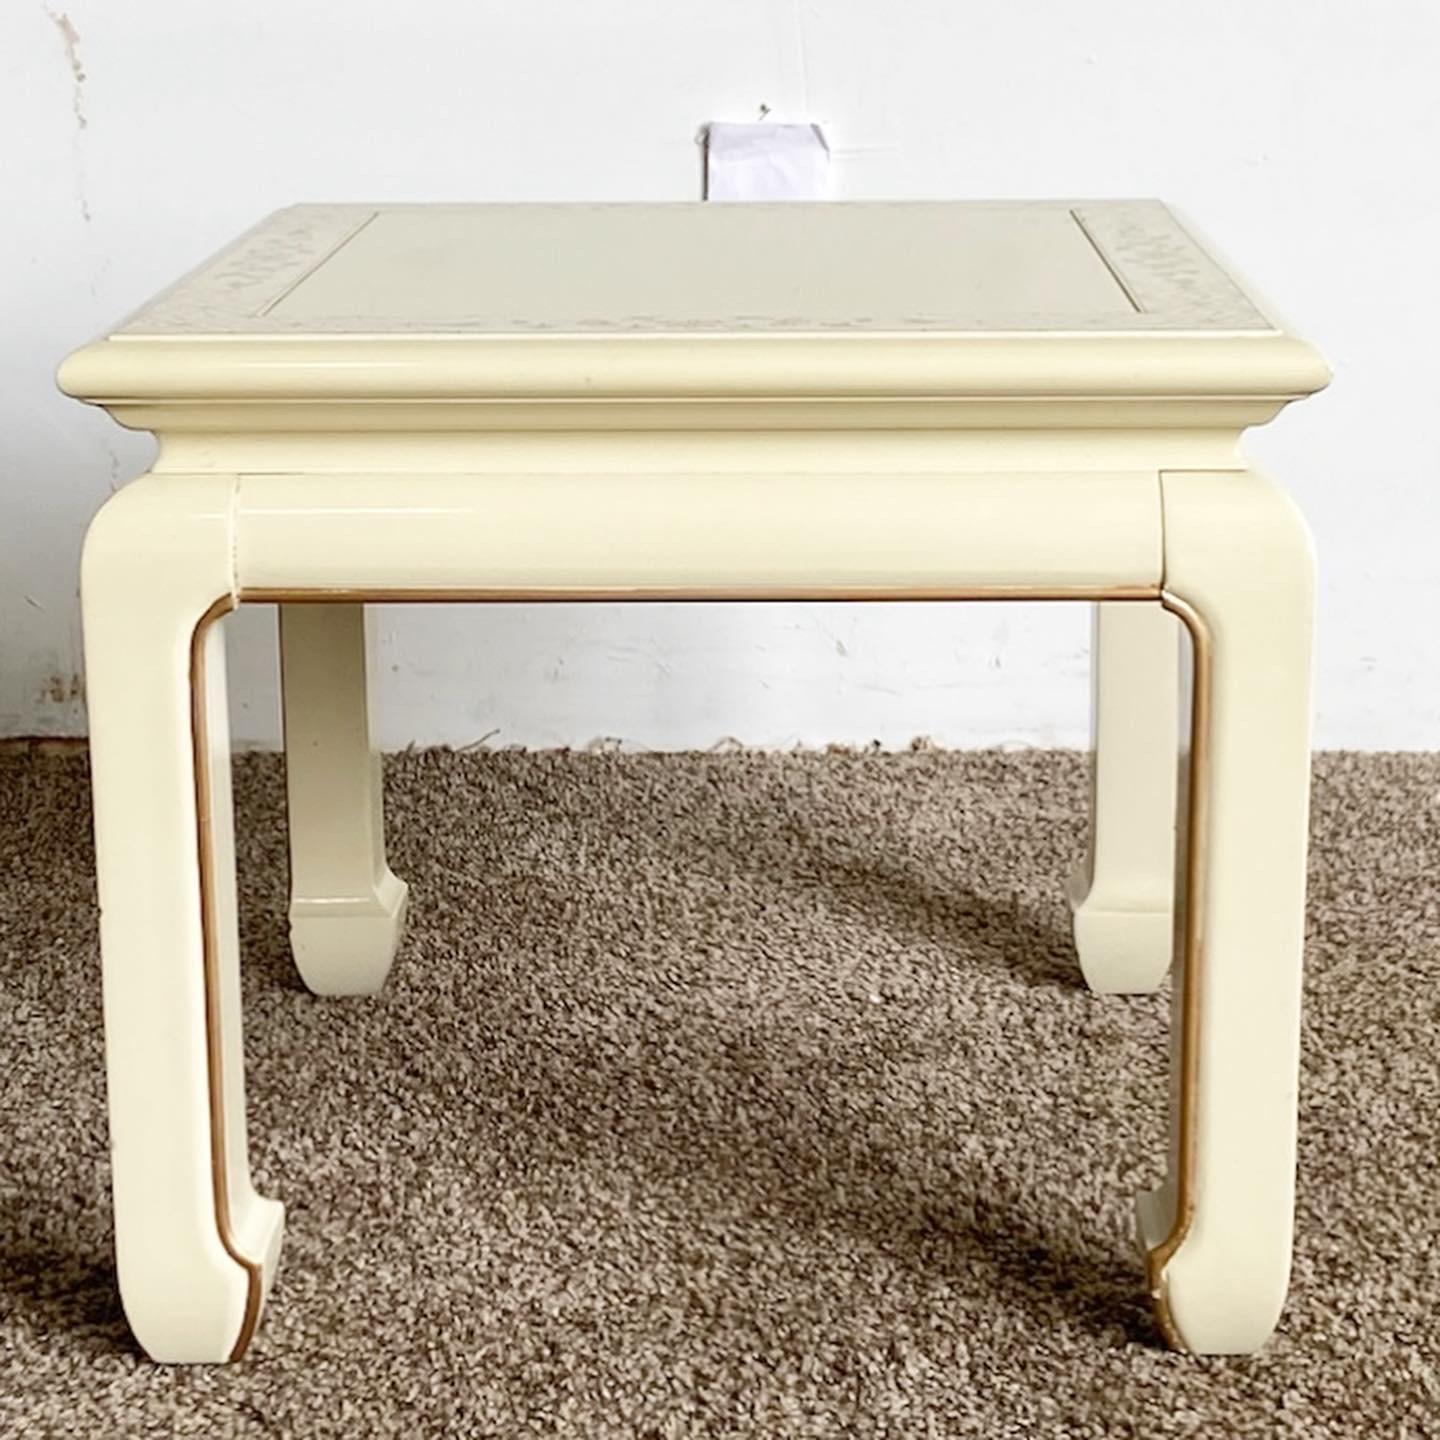 Exceptional vintage Chinese wooden square side table. Features a cream lacquered finish with hand painted gold and floral accents.